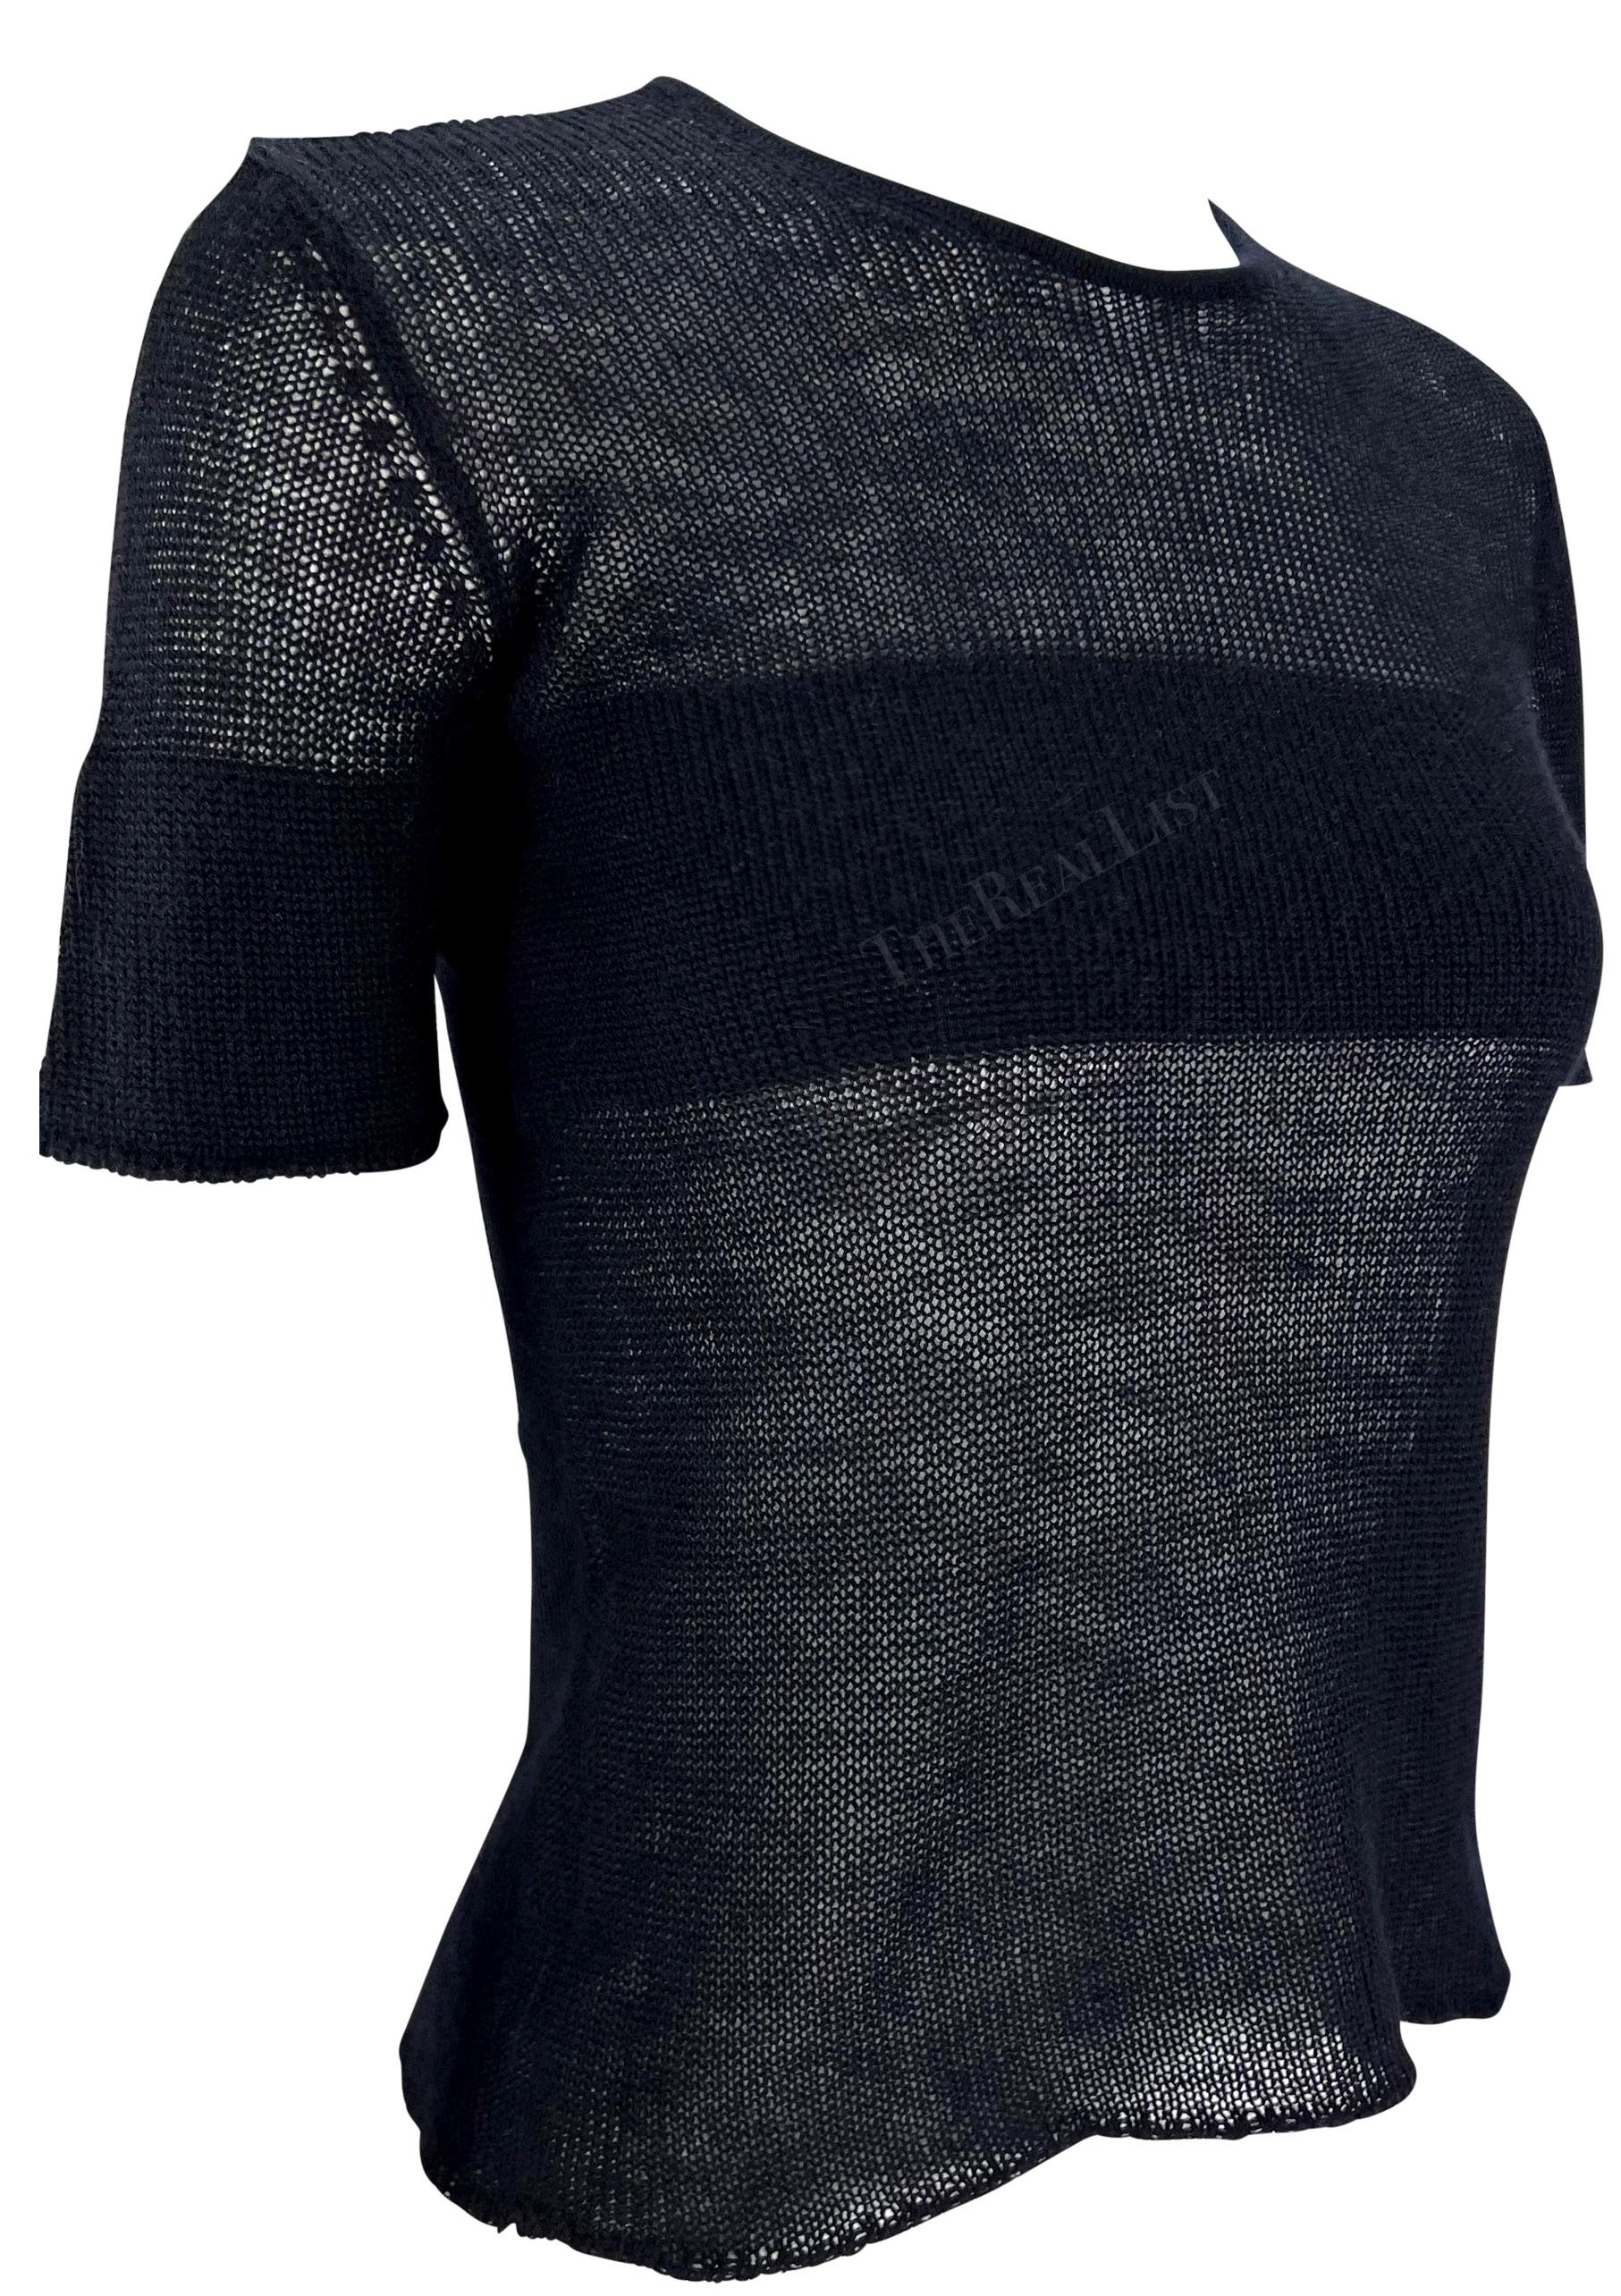 1990s Giorgio Armani Sheer Black Knit Cashmere Sweater Short Sleeve Top For Sale 1